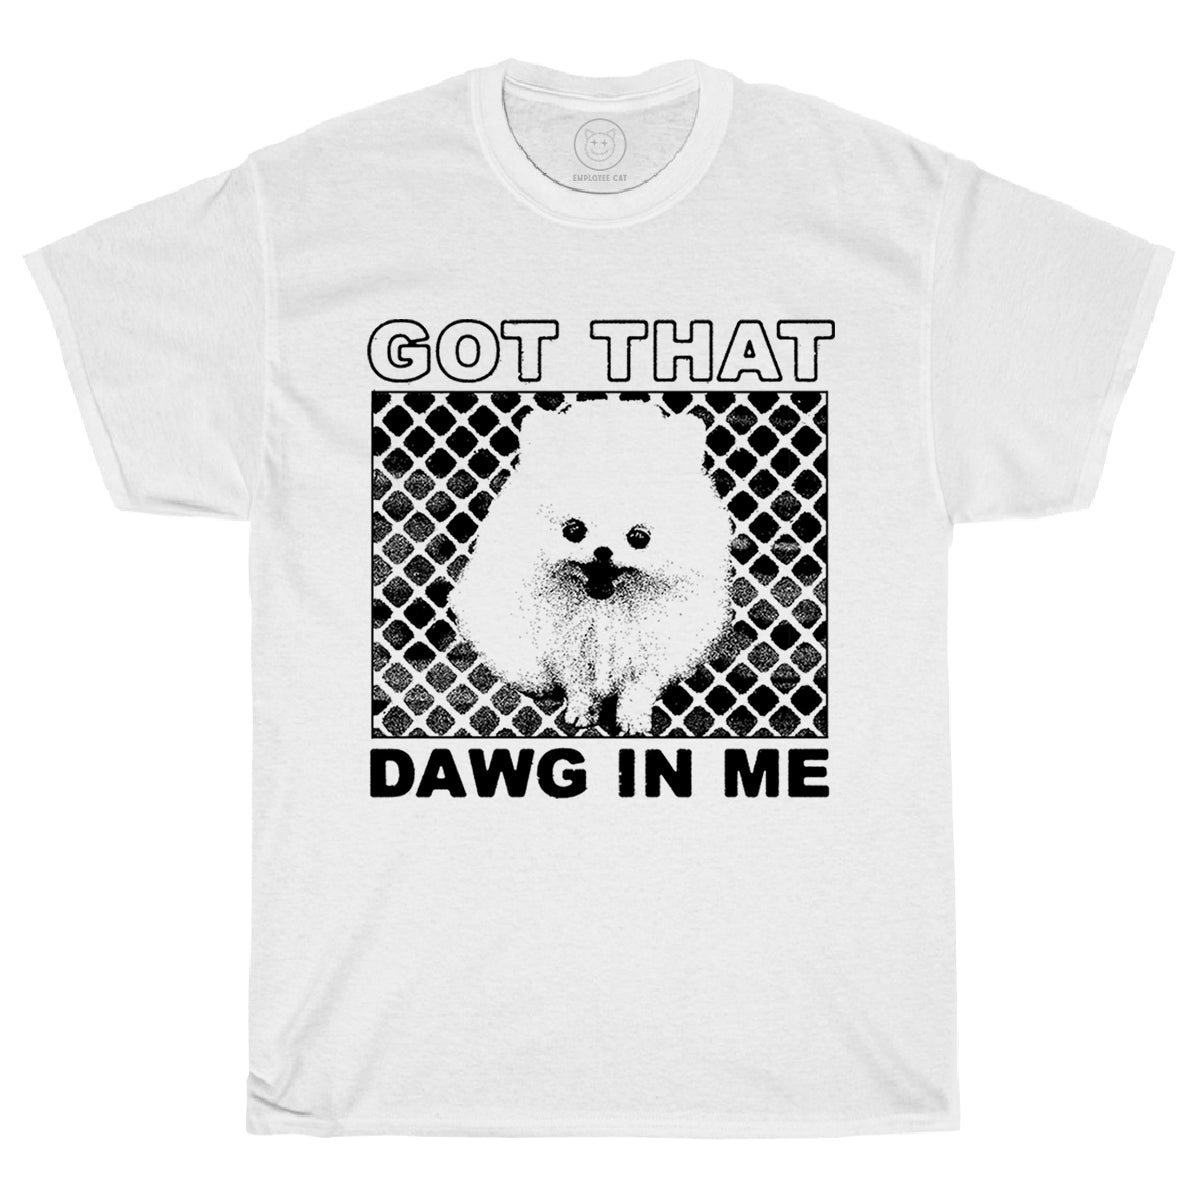 That Dawg In me Tee